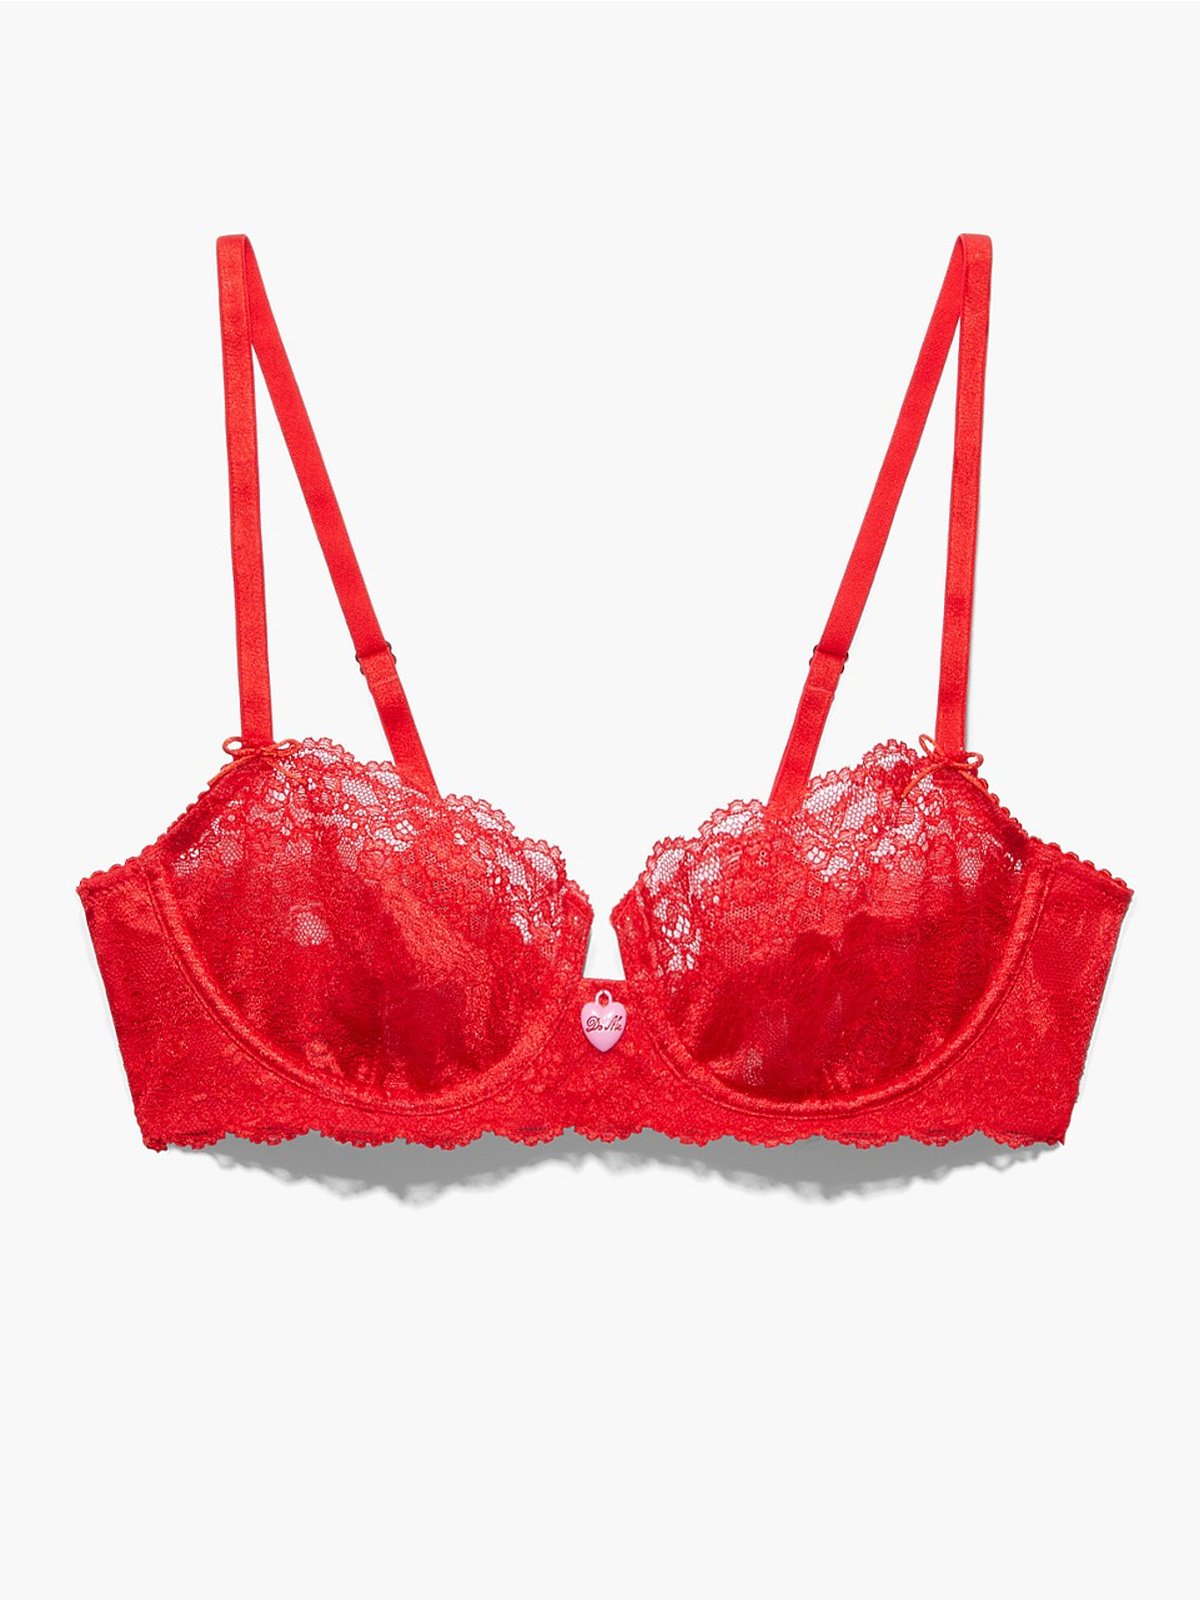 adviicd Backless Bras for Women Women's Balconette Bra with Padded Straps  Red Large 